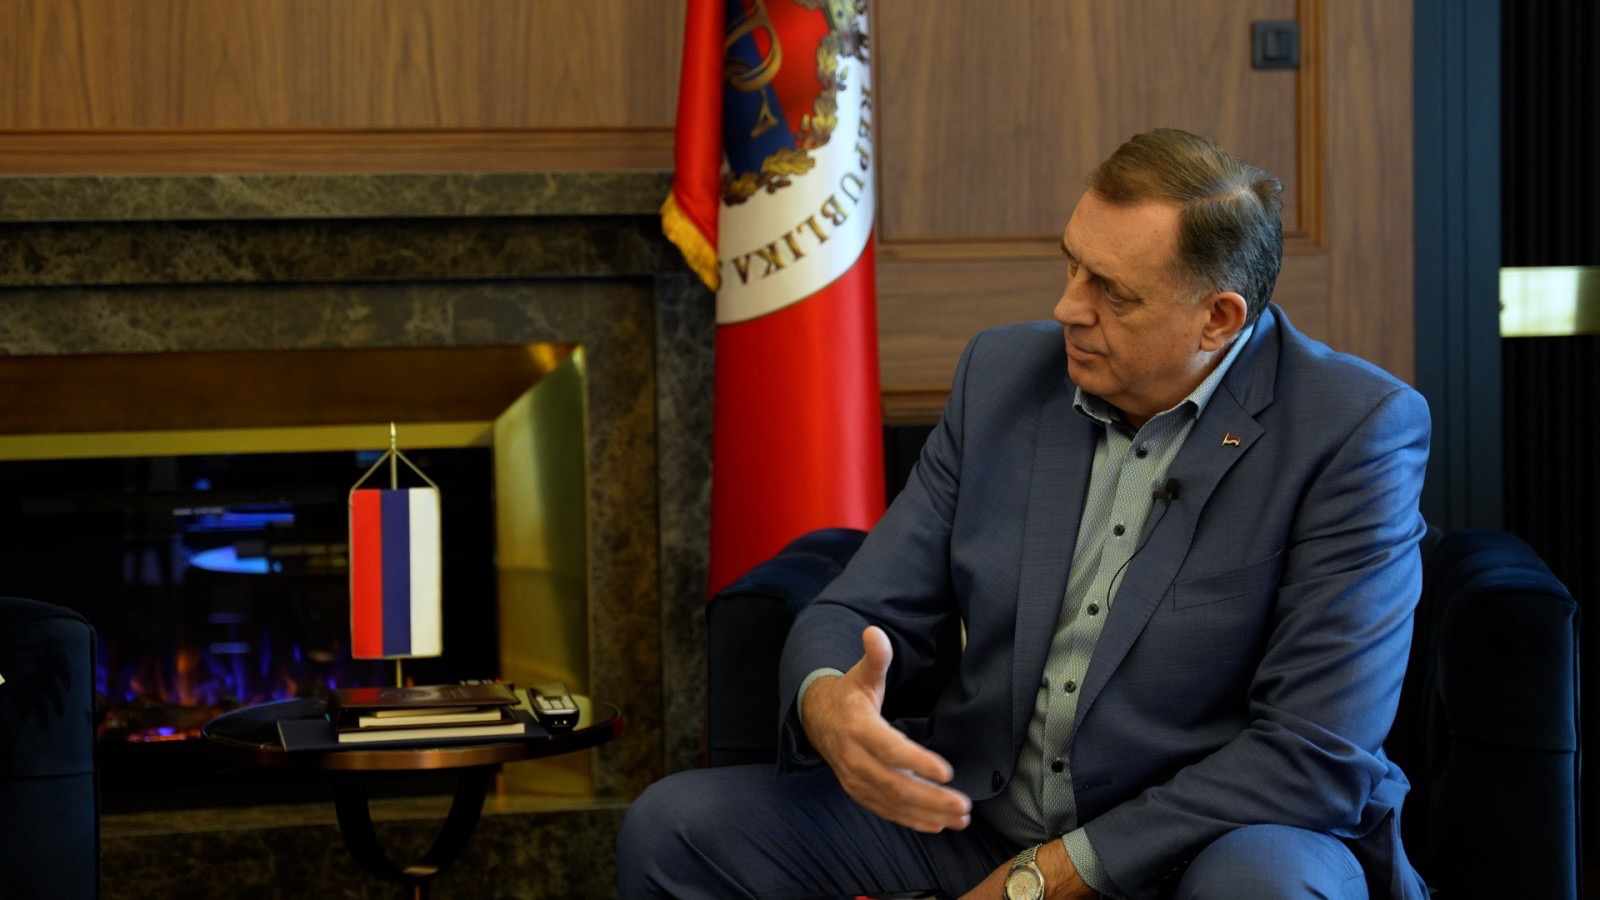 Dodik: “The Only Solution For The Serbian People Here Is An Independent Republika Srpska”